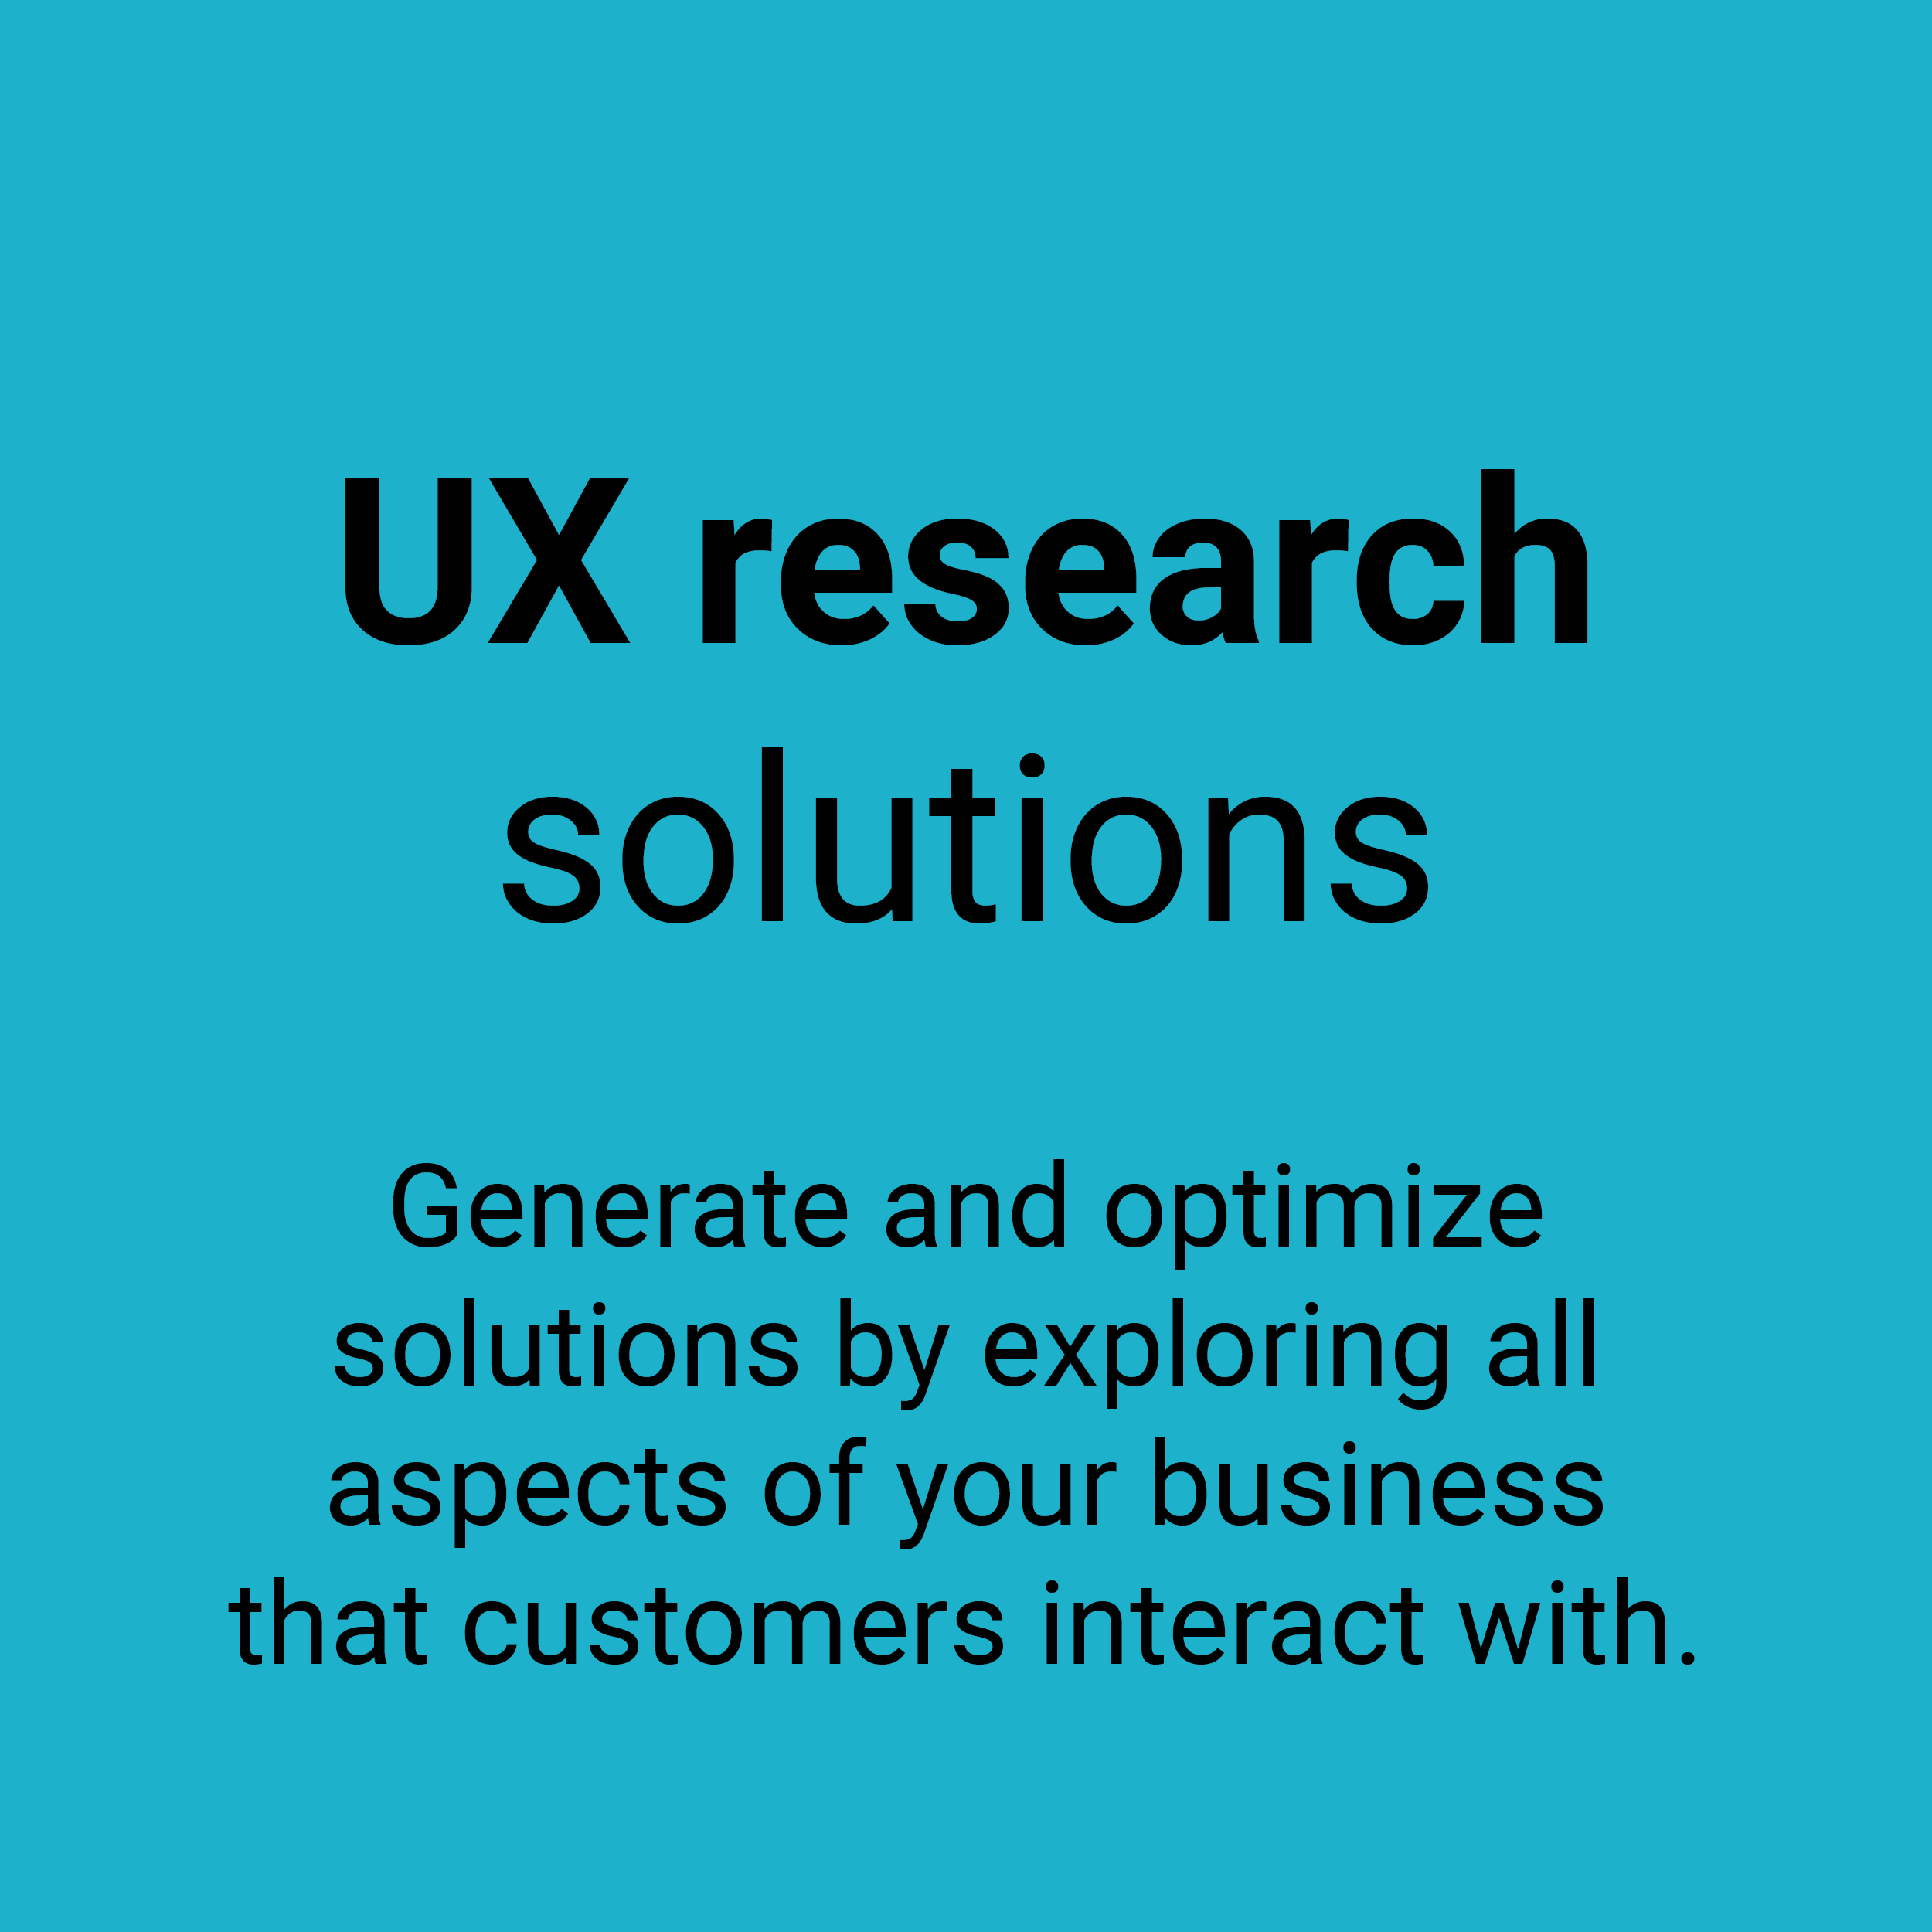 UX research solutions. Generate and optimize solutions by exploring all aspects of your business that customers interact with.